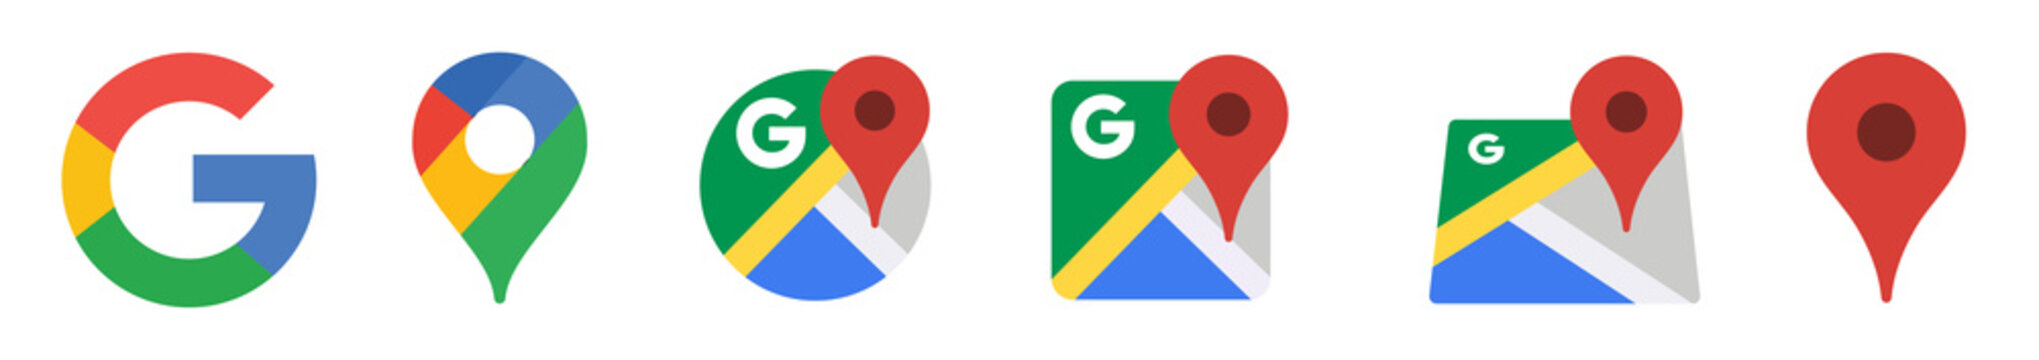 Google Maps icon set. Location icon symbol. Map pin markers. Google products and programs logo. Vector illustration.